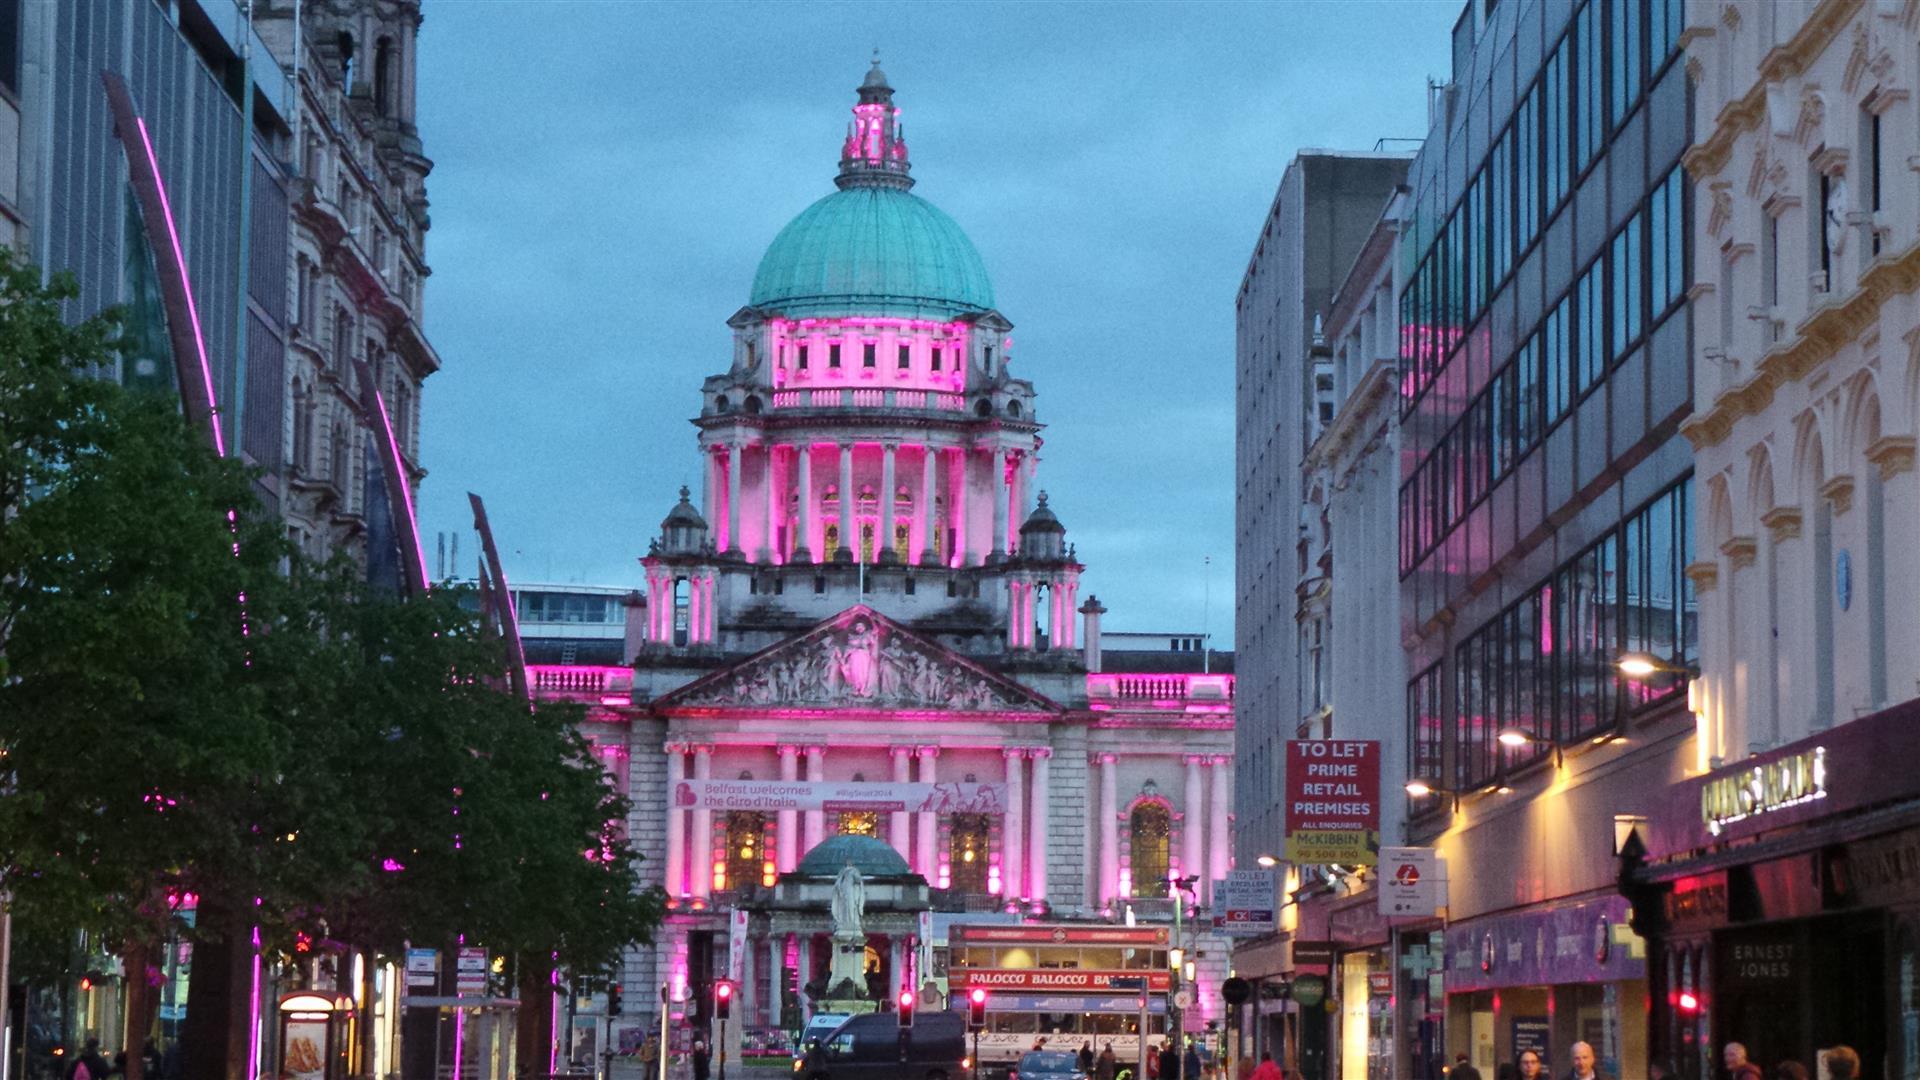 Belfast City Hall is the Meeting place for the Belfast Eclectic City Center Walking Tour